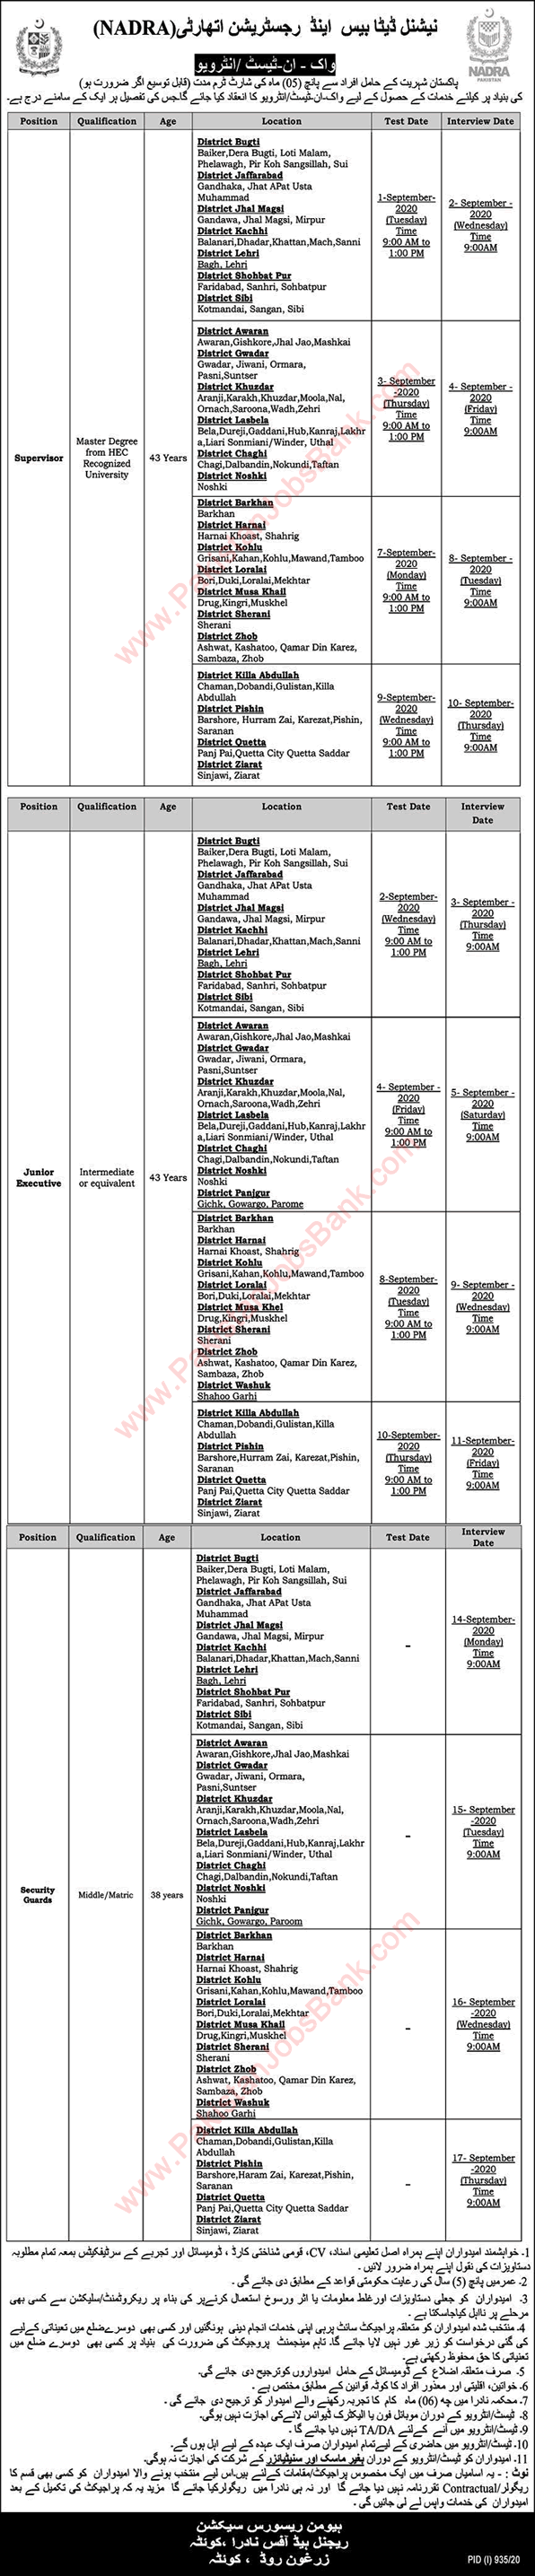 NADRA Balochistan Jobs August 2020 Walk in Tests / Interviews National Database and Registration Authority Latest